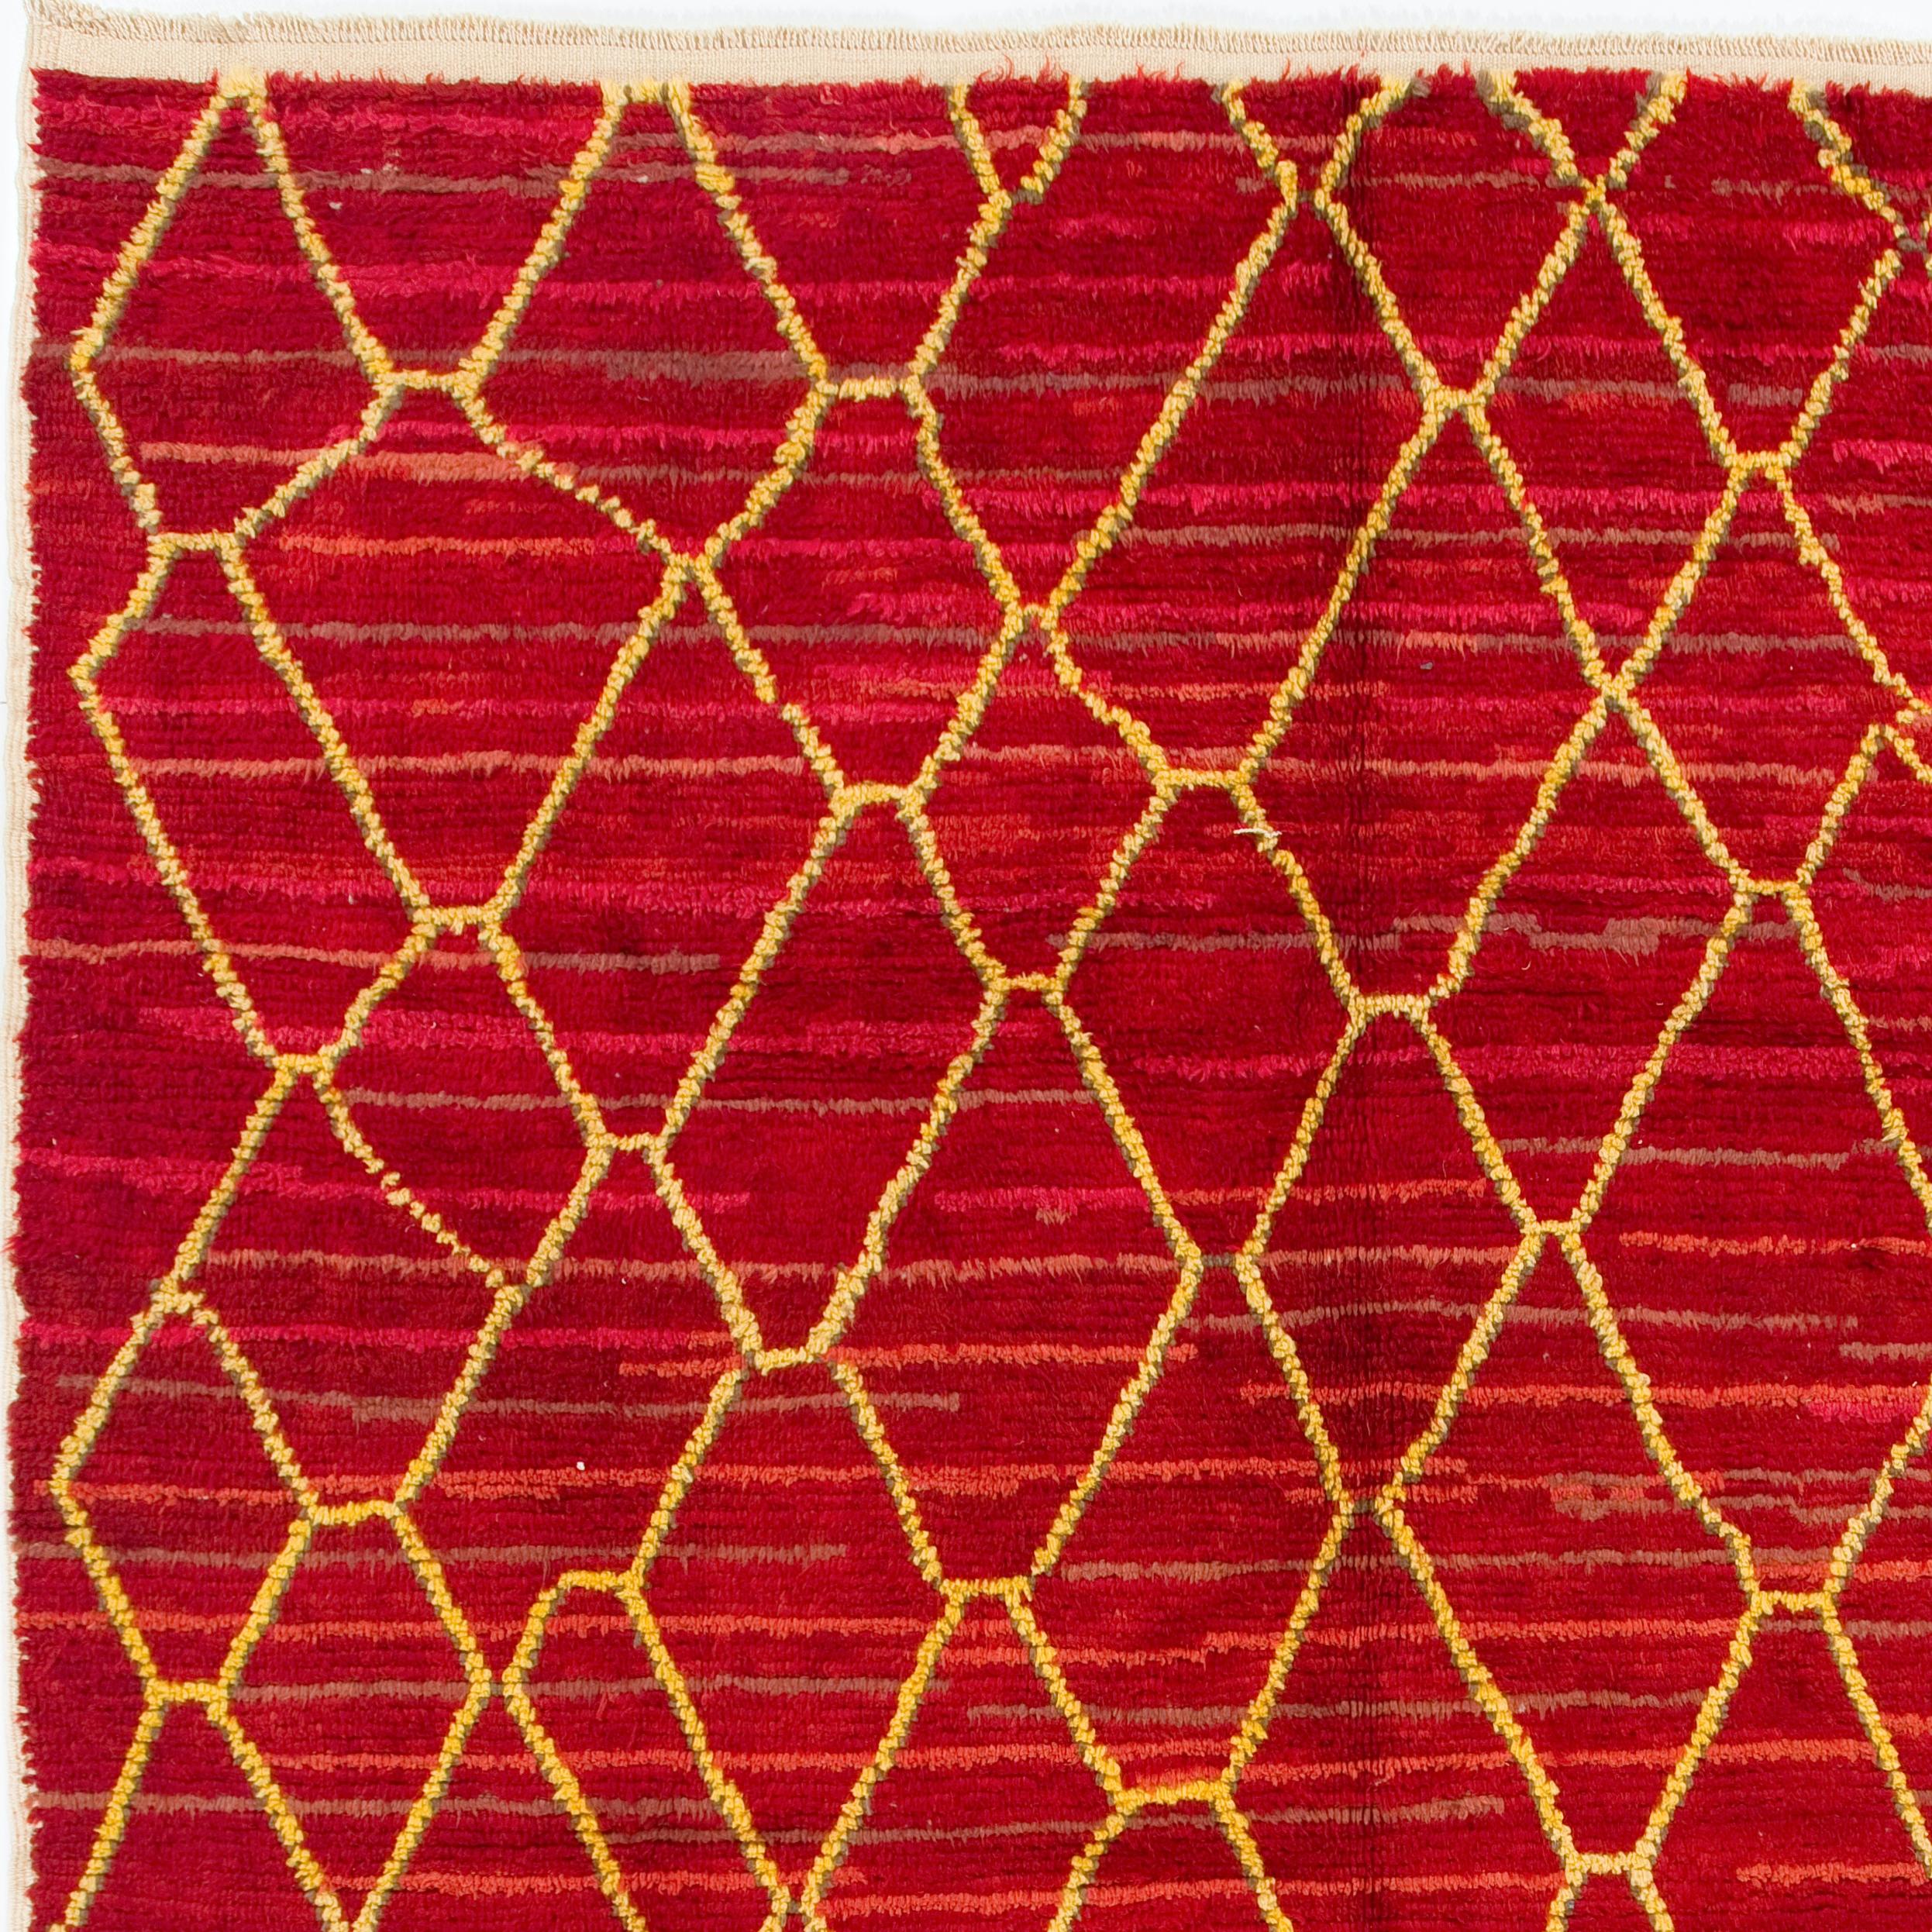 A contemporary hand knotted Moroccan rug inspired by the Berber culture in the Atlas Mountains, with soft velvety pile, made of hand-spun natural lambs-wool. It has an overall loose lattice design in yellow against a richly colored field in tomato